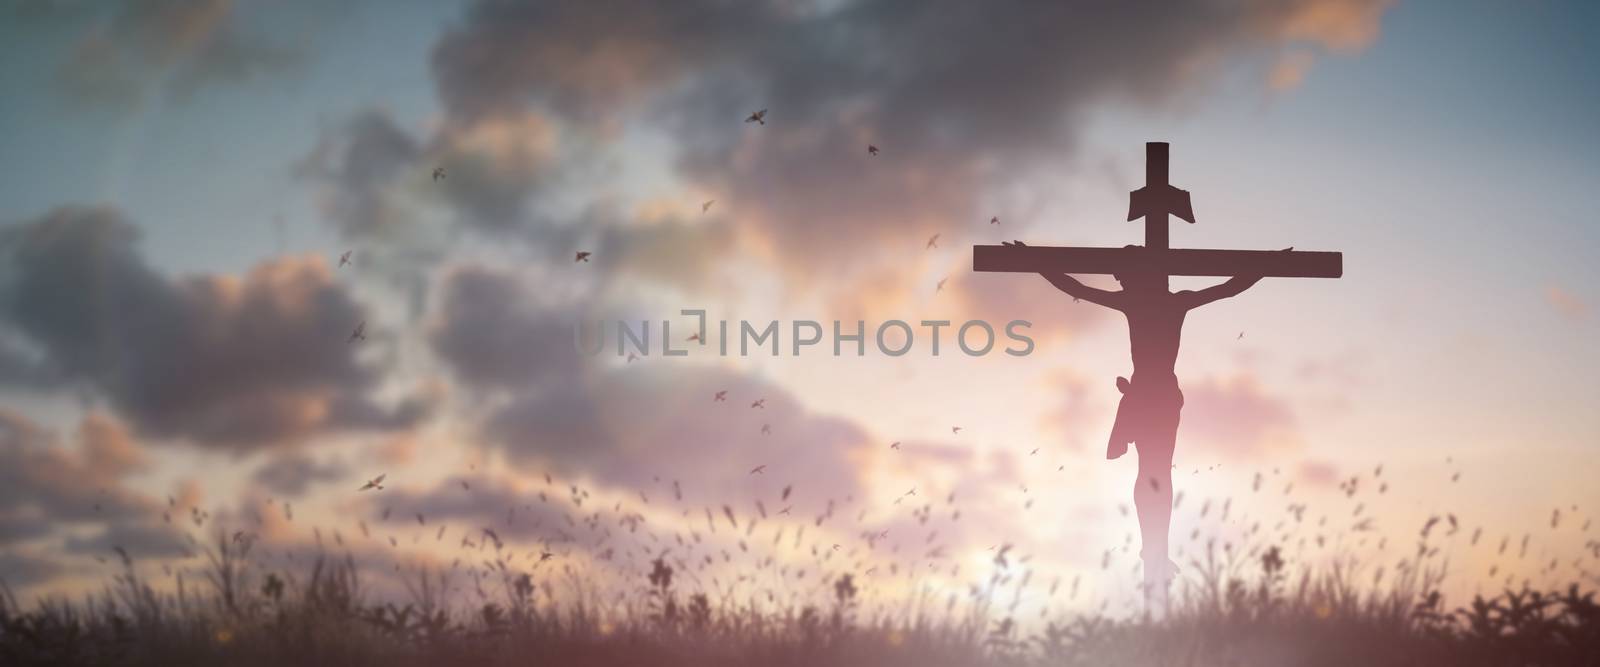 Silhouette Jesus christ death on cross crucifixion on calvary hill in sunset good friday risen in easter day concept for Christian praise for holy spirit religious God, Catholic praying background.